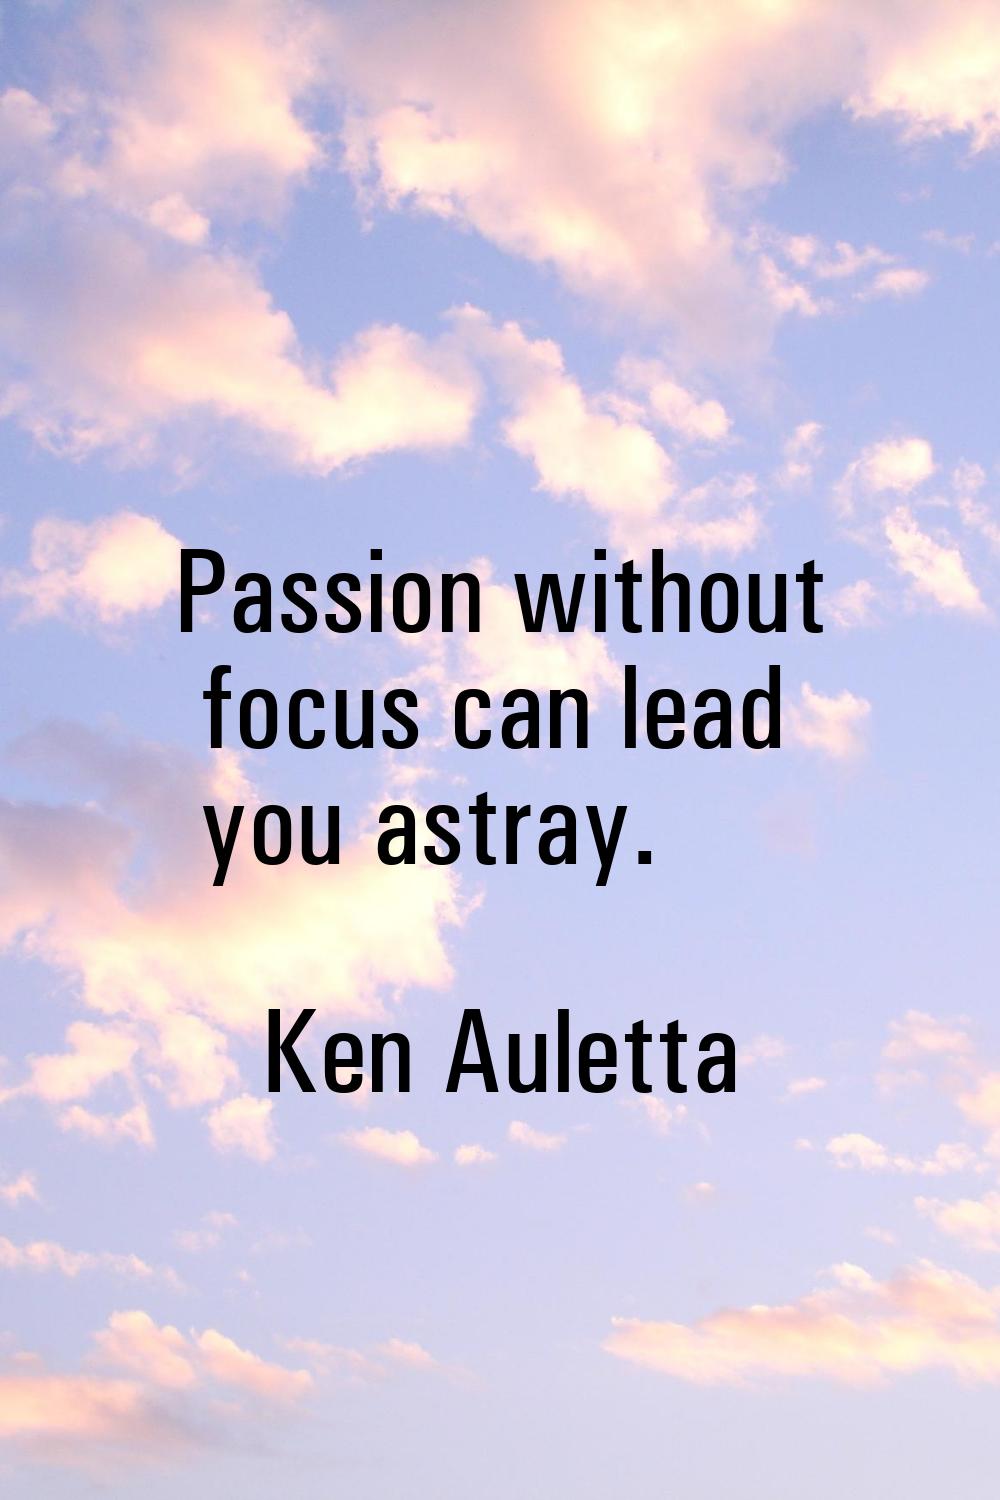 Passion without focus can lead you astray.